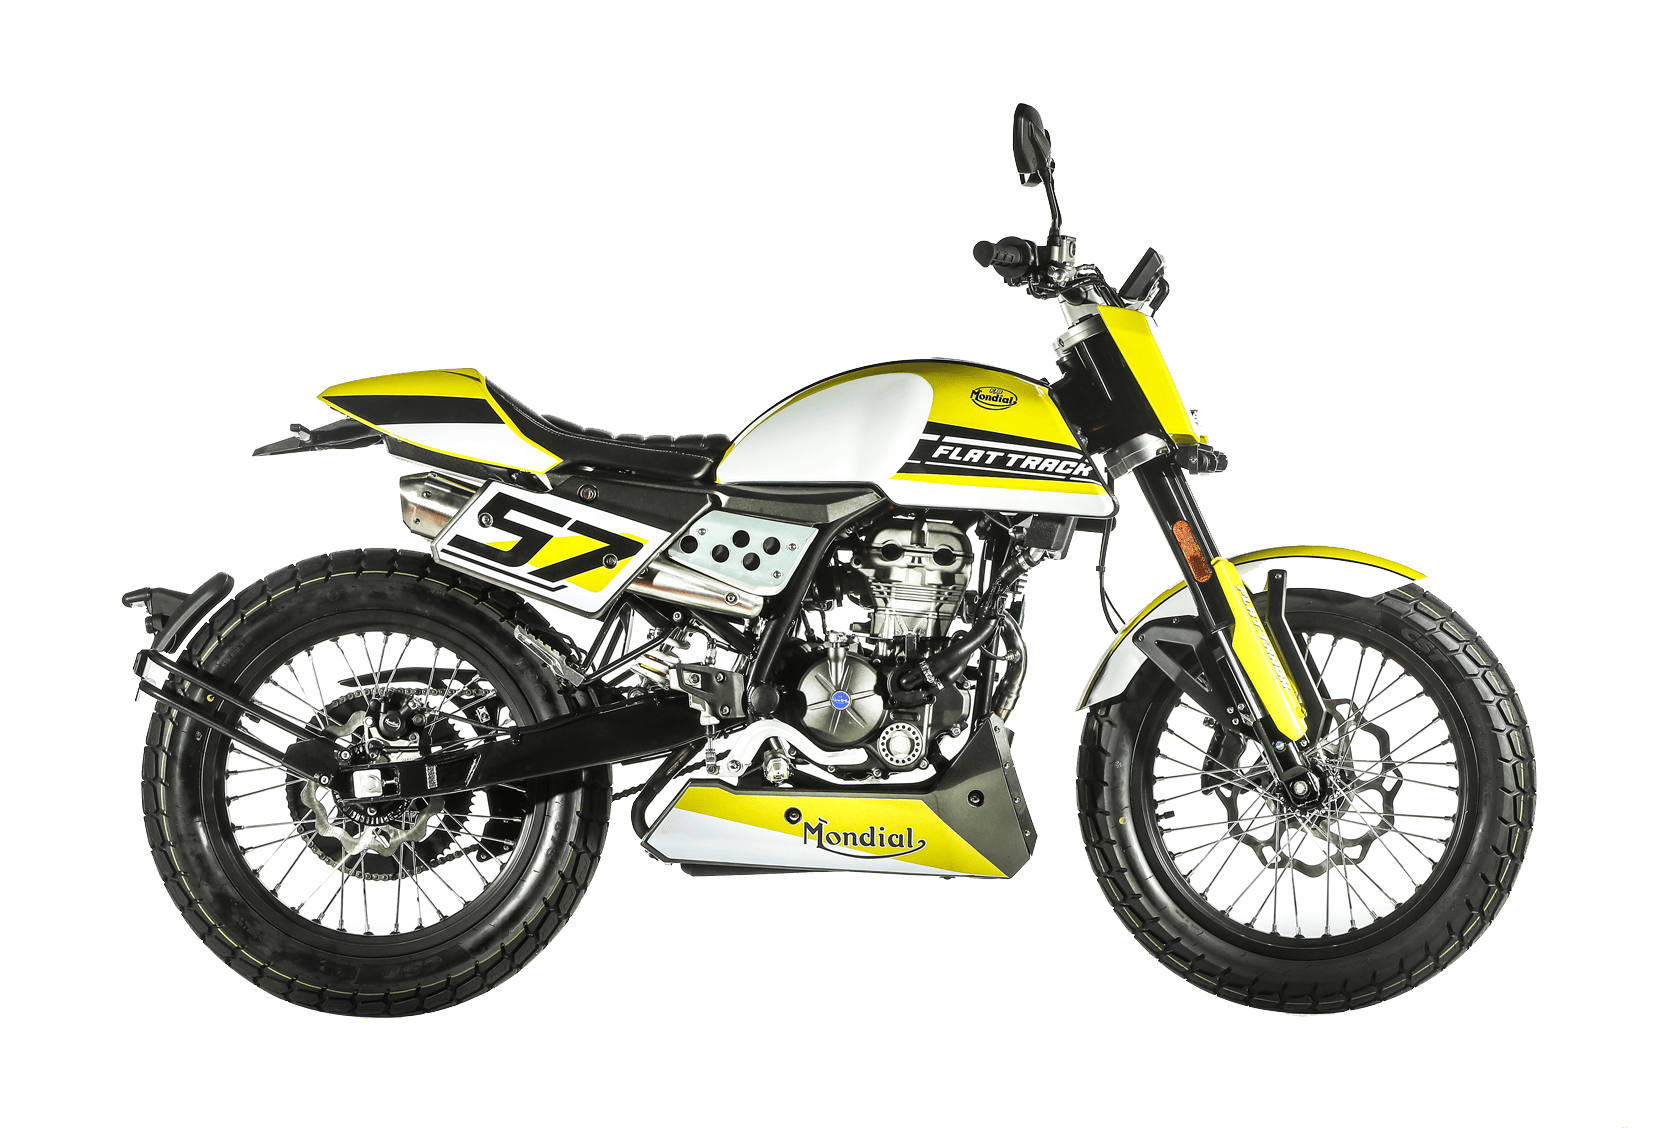 FB Mondial Flat Track 125 with Euro5
- also in the App MOTORCYCLE NEWS